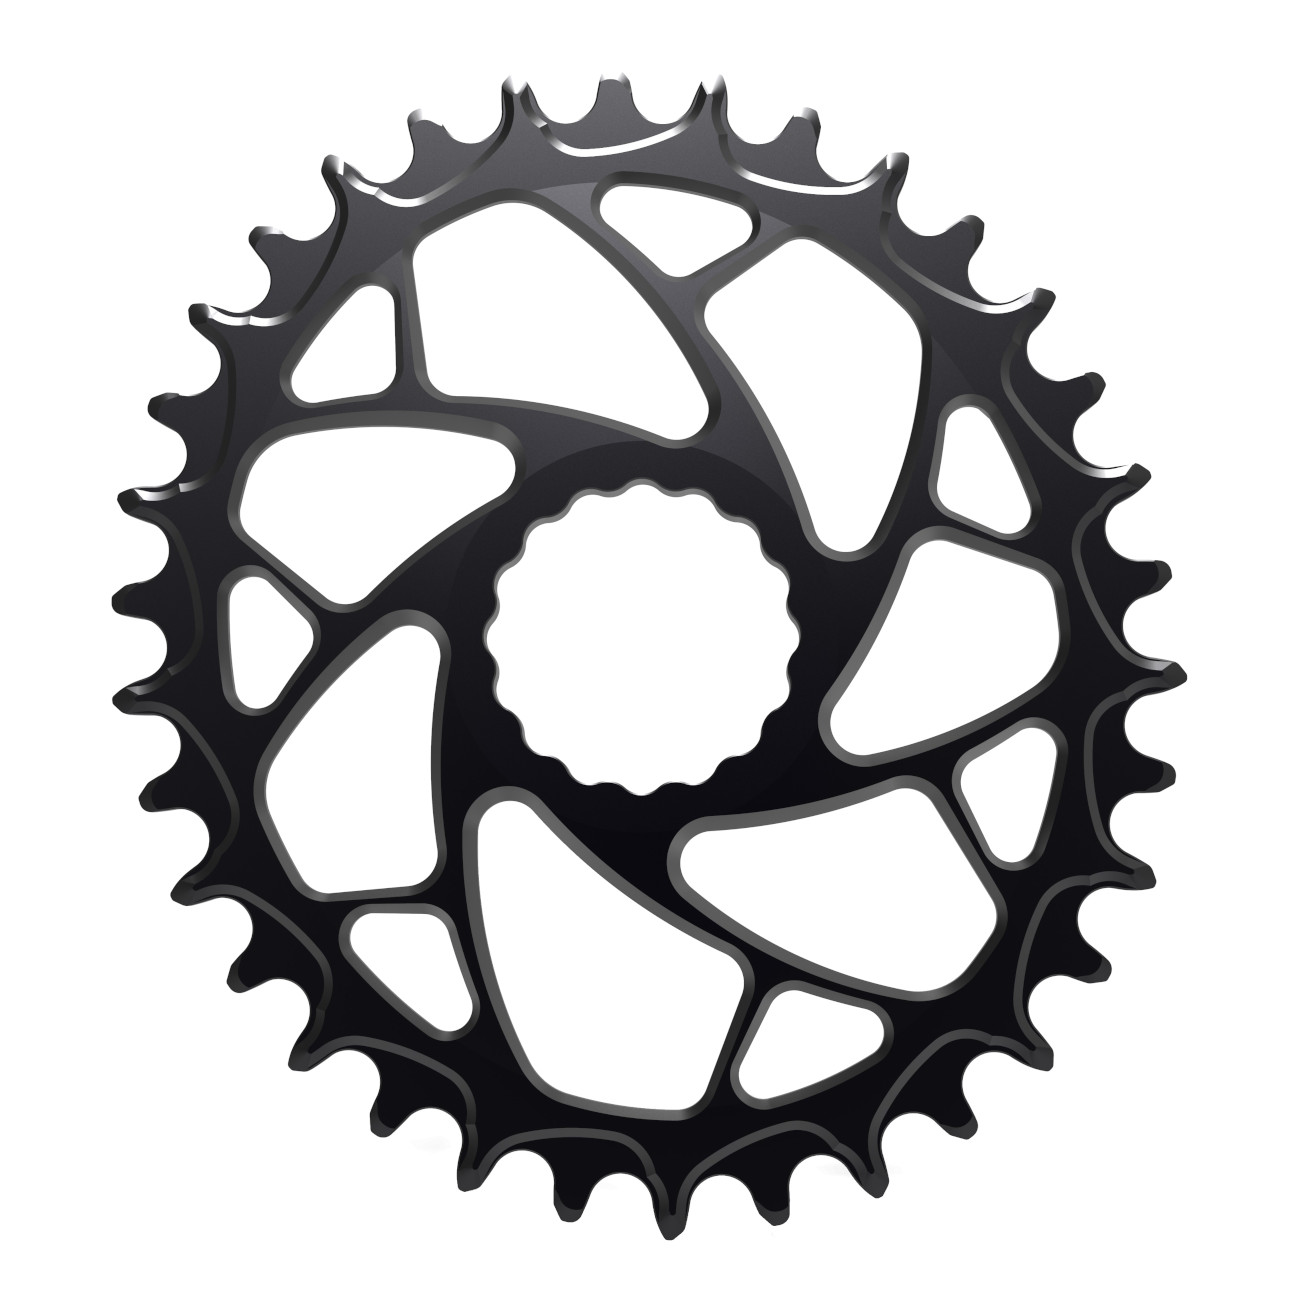 Productfoto van Alugear ELM Narrow Wide Boost Chainring - Oval - for Race Face Cinch Direct Mount